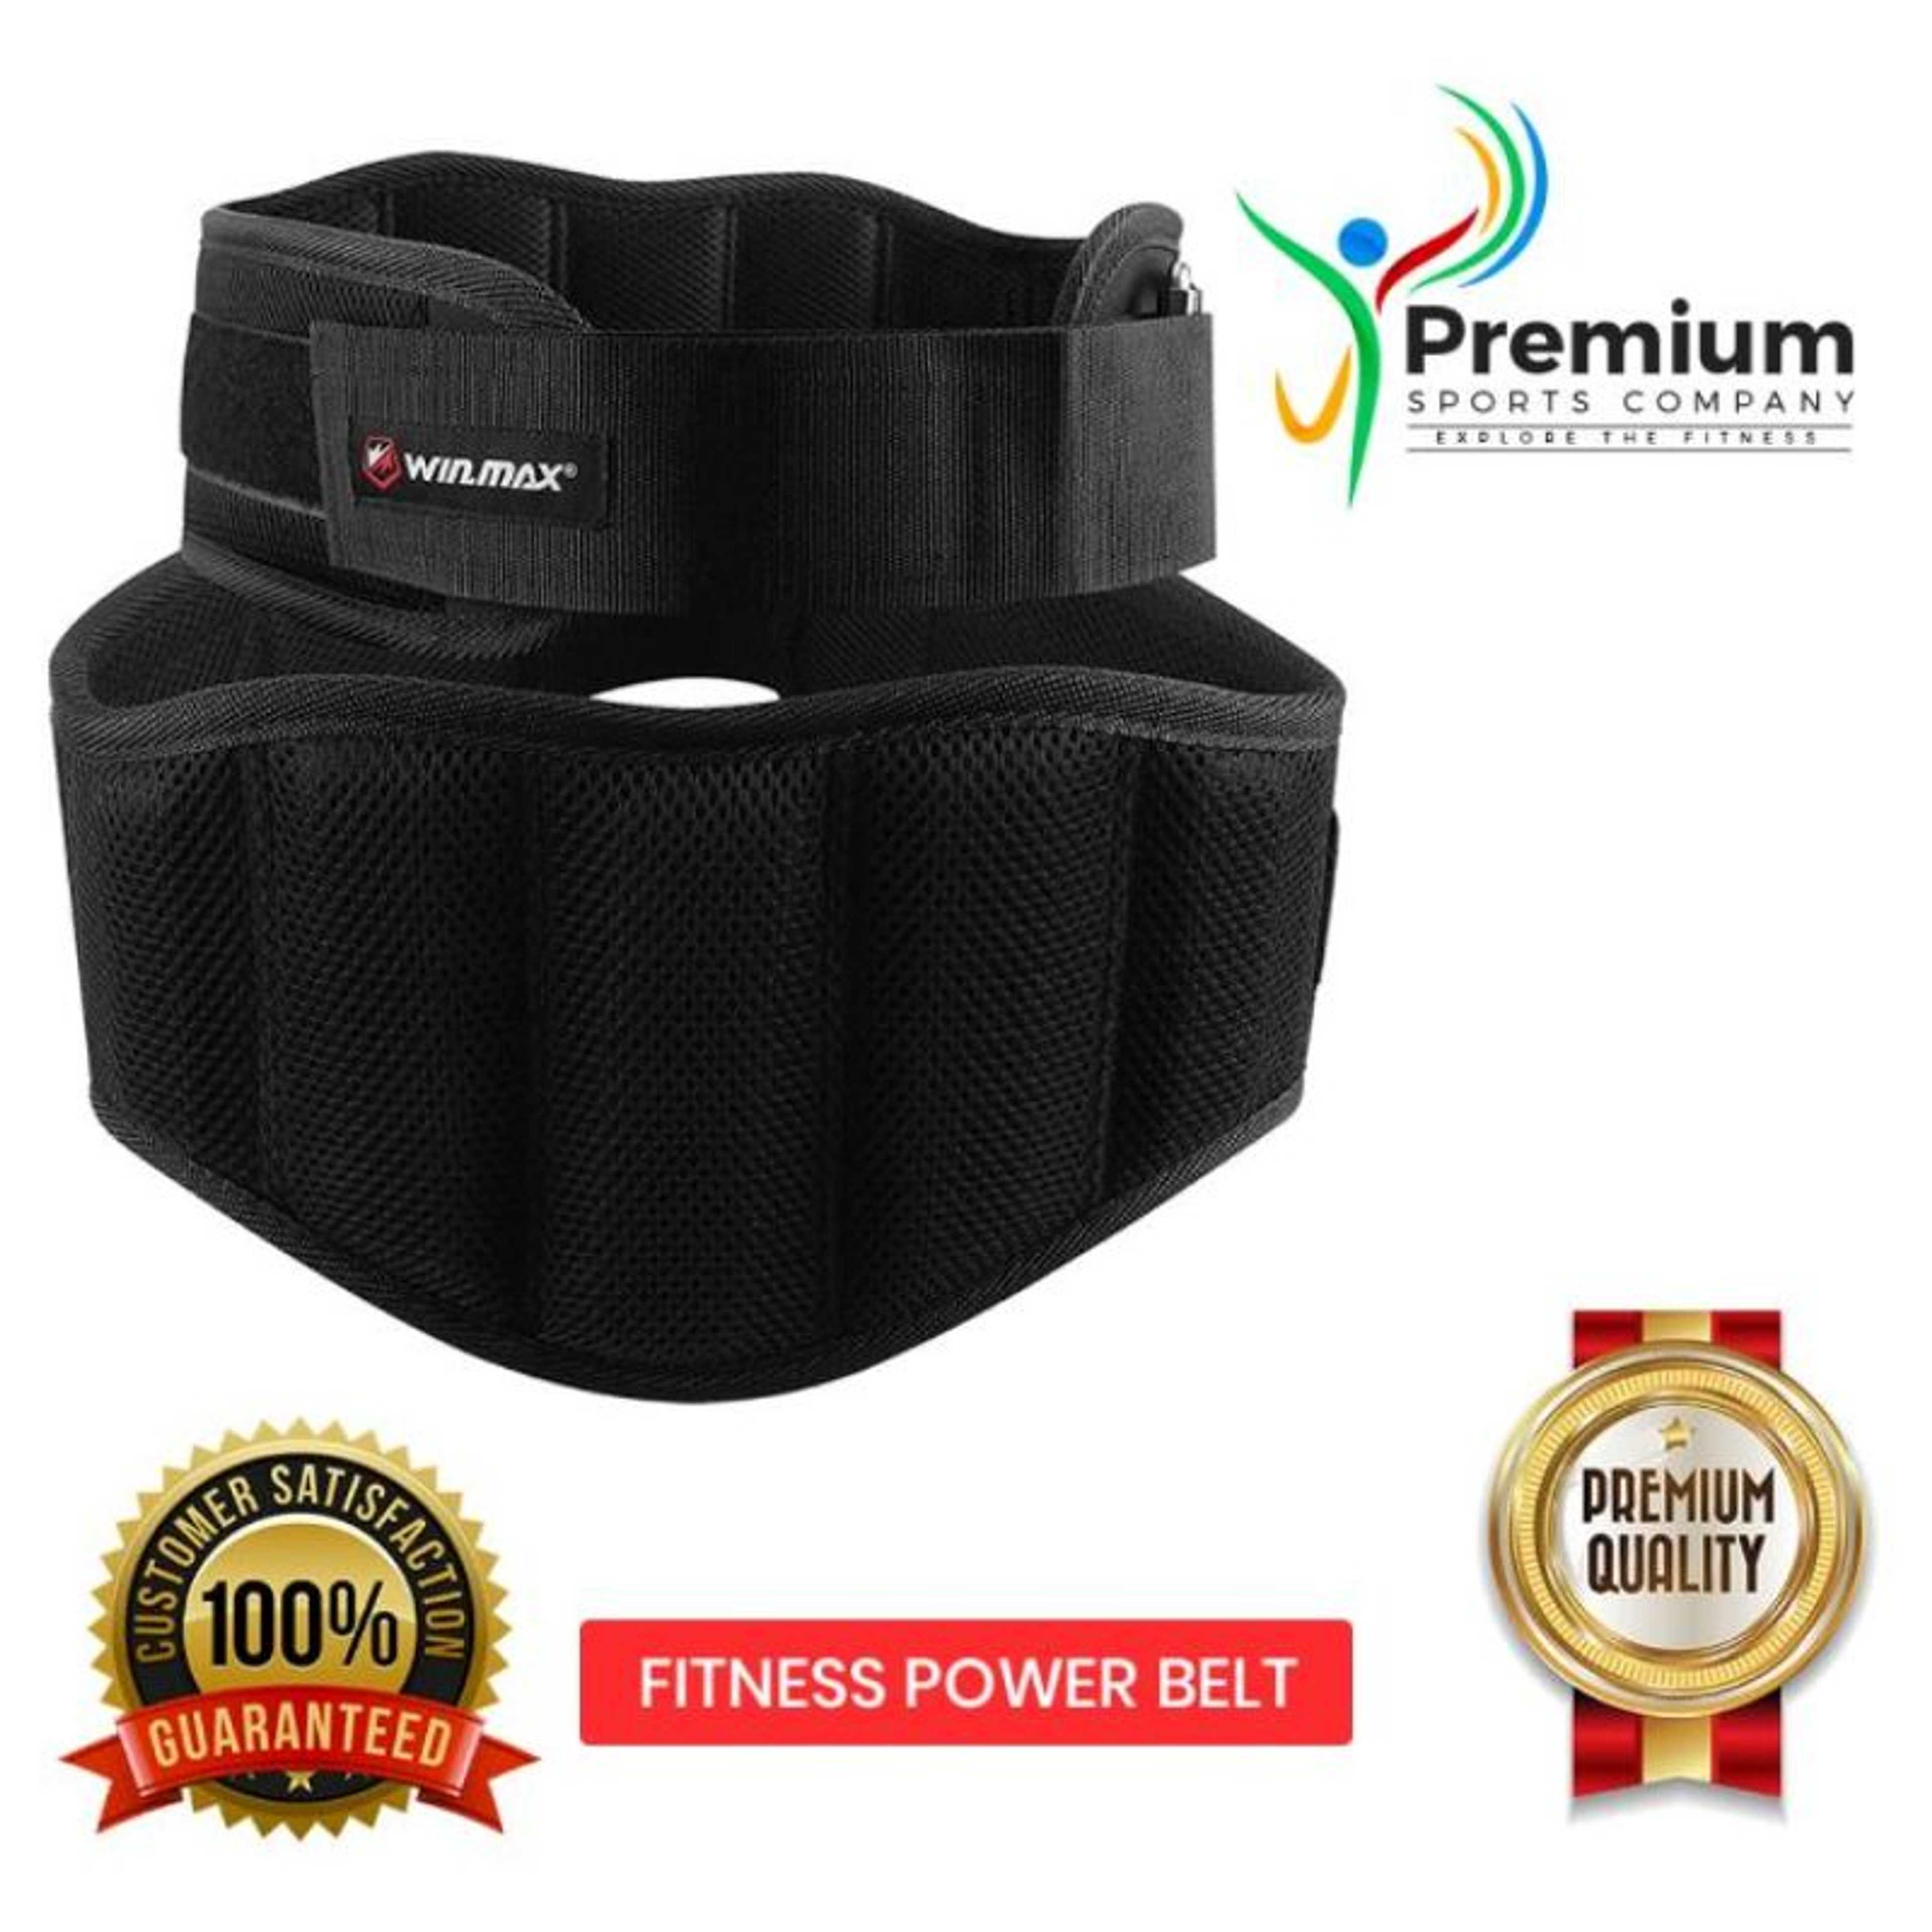 Pro Action Weight Lifting Gym Fitness Power Belt - Neoprene Padded - Back Pain Support Belt - Great for Body Building, Training, Powerlifting, Deadlifts For Men and Women - Red